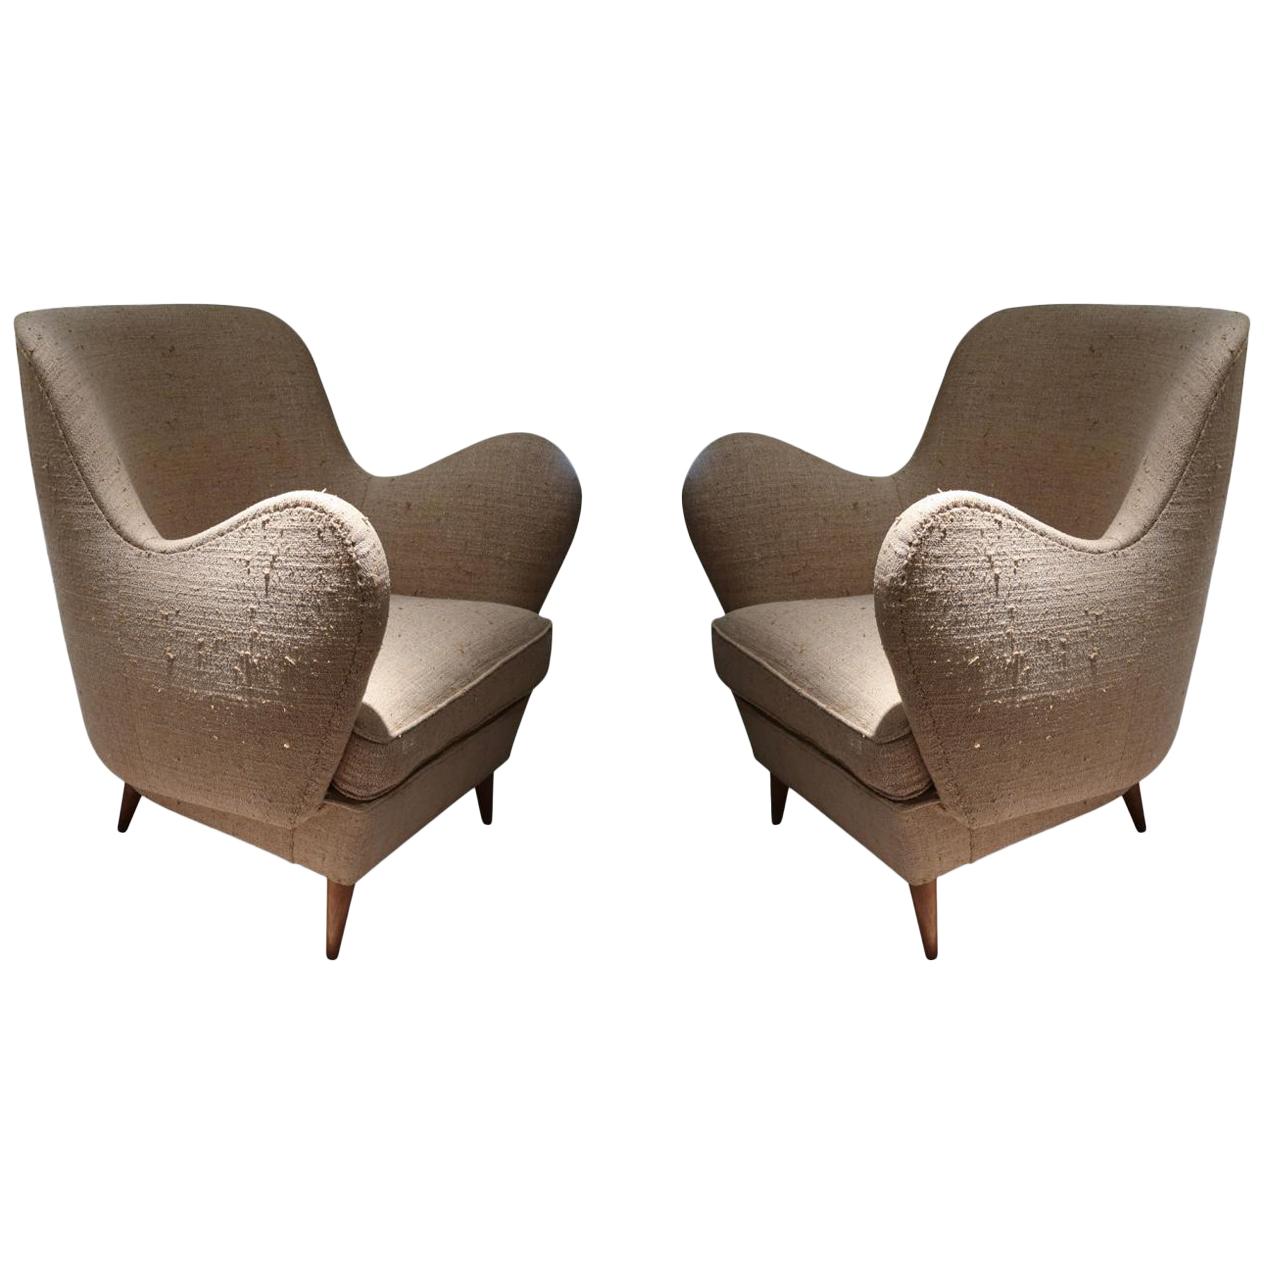 ISA, Pair of Beige Indian Silk and Wood Legs Midcentury Italian Armchairs, 1950 For Sale